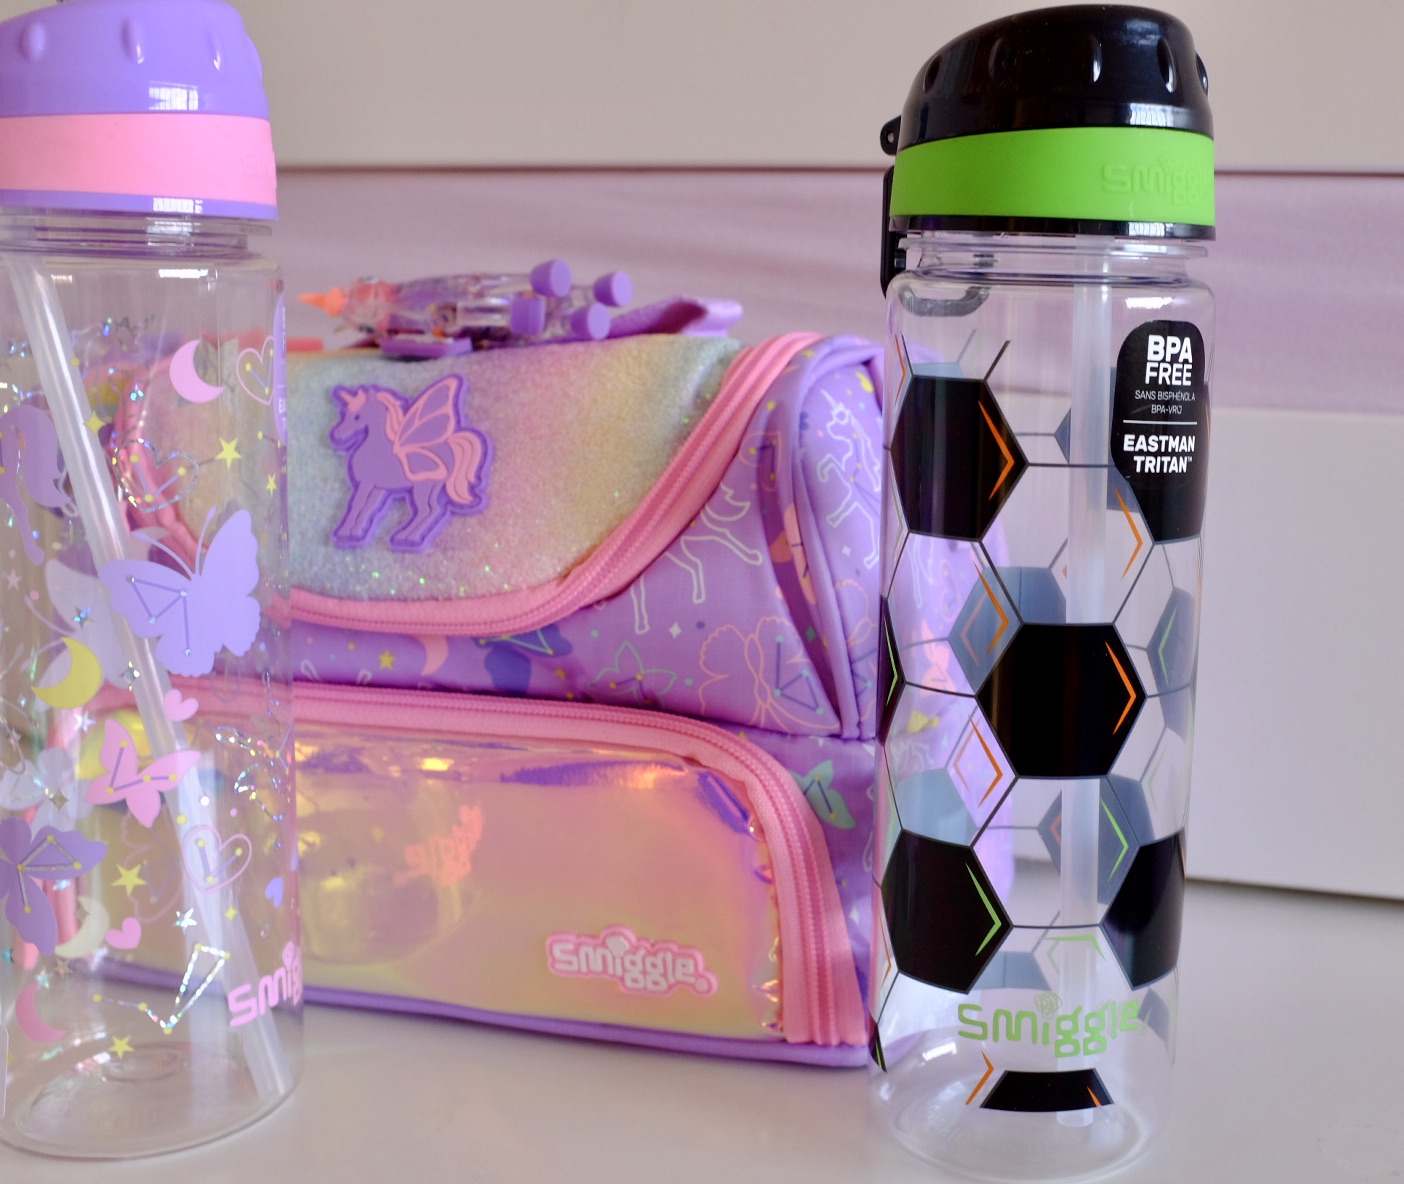 Smiggle products 